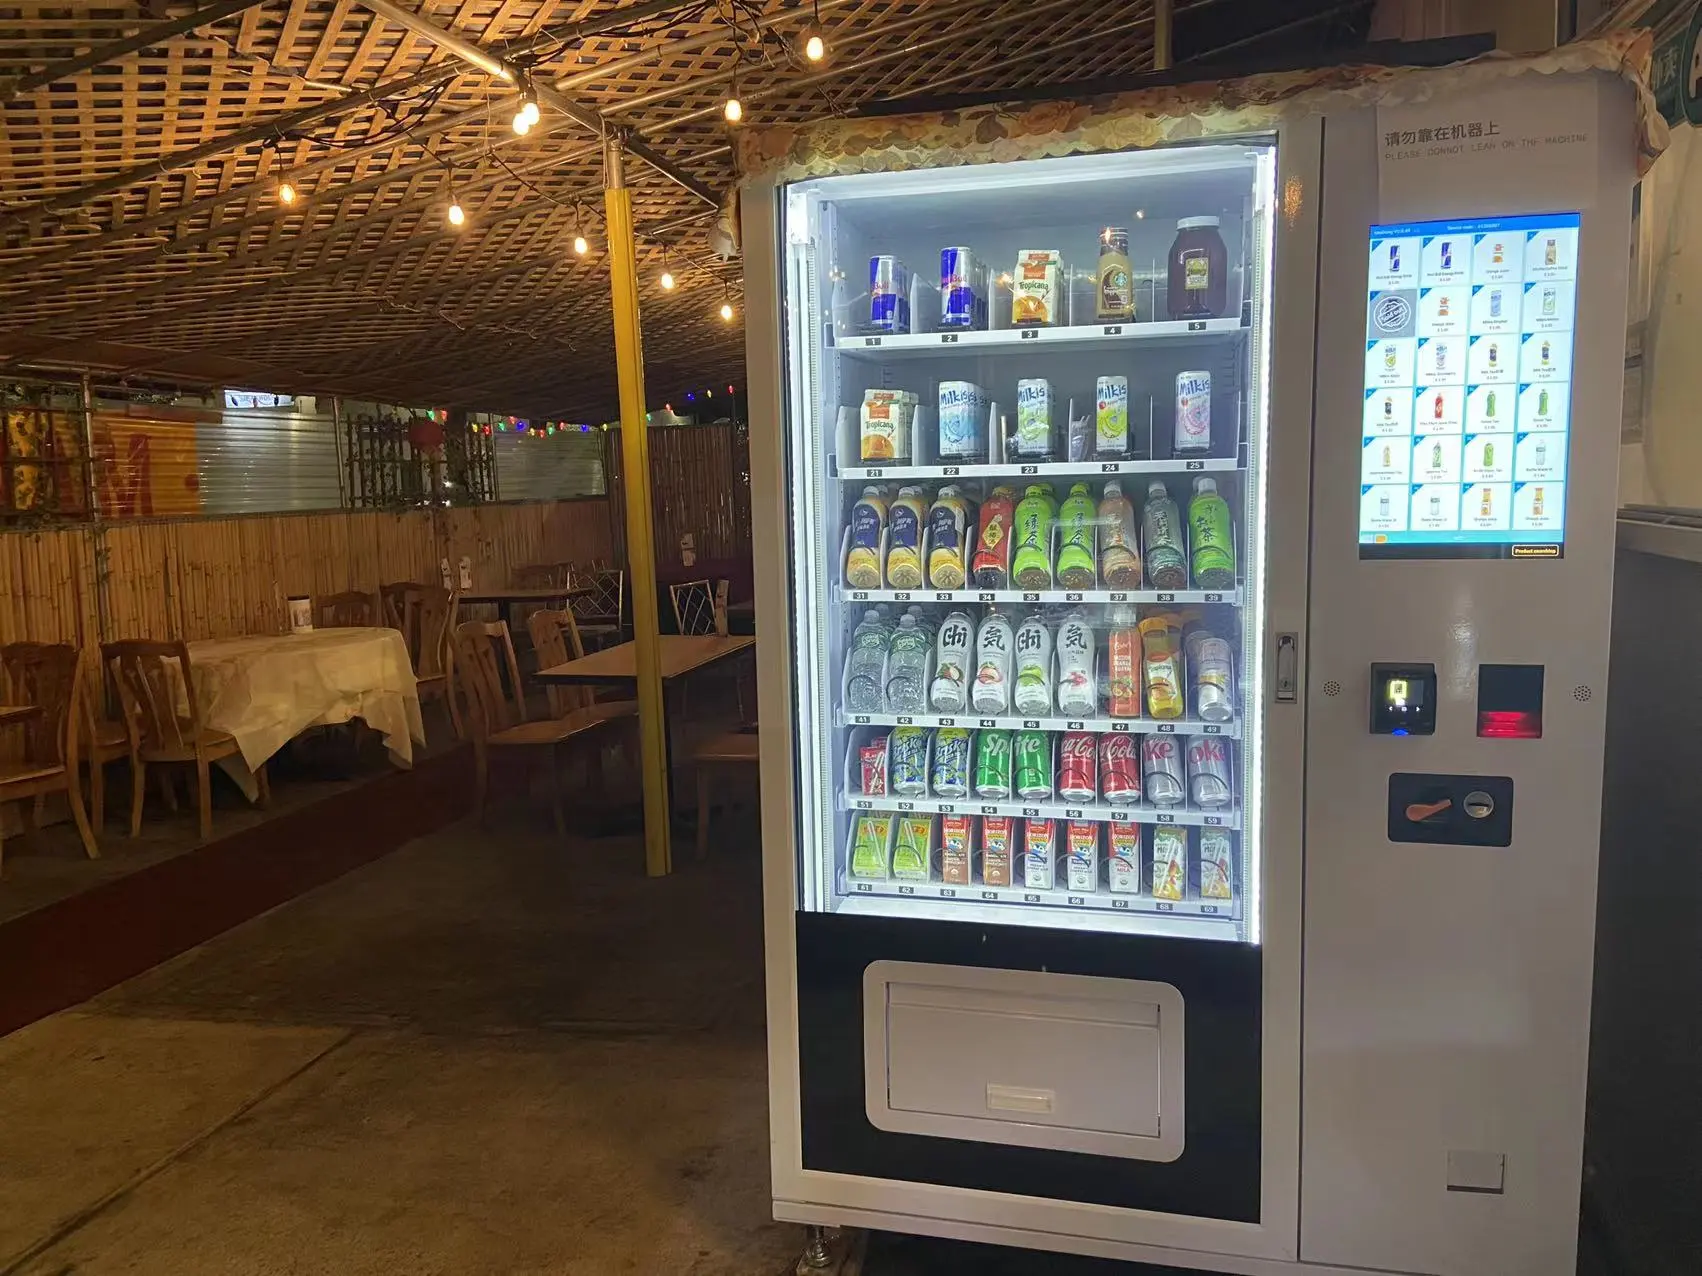 Intelligent Elevator Food Deli Vending Machine with 21.5-inch touchscreen & card reader in USA